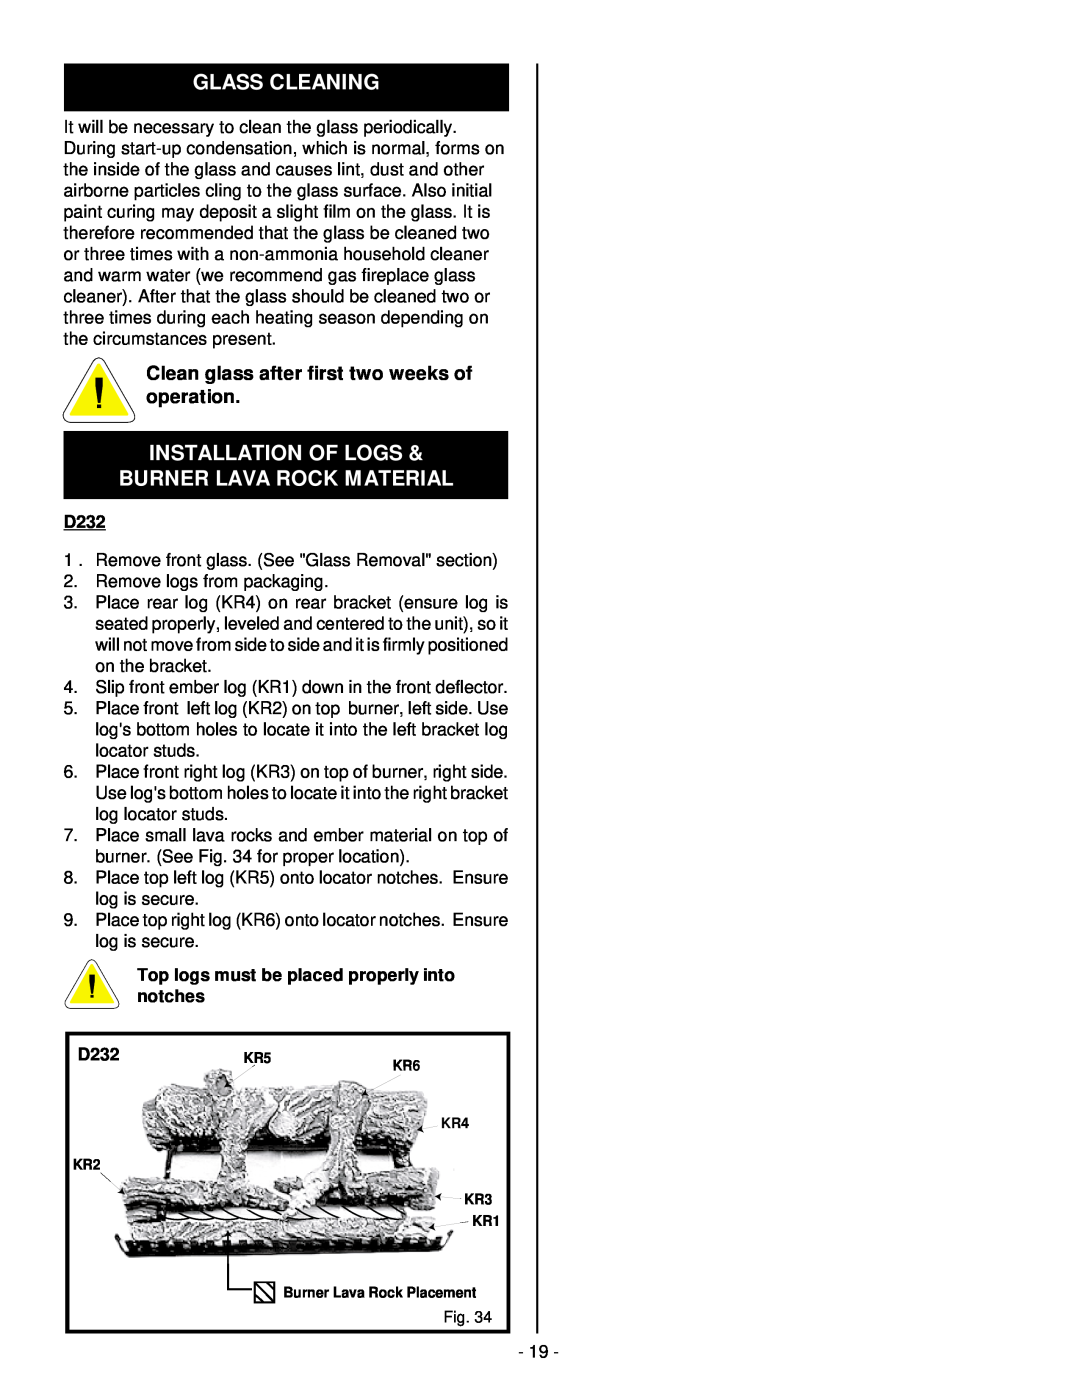 Vermont Casting D232 installation instructions Glass Cleaning, Installation Of Logs & Burner Lava Rock Material 